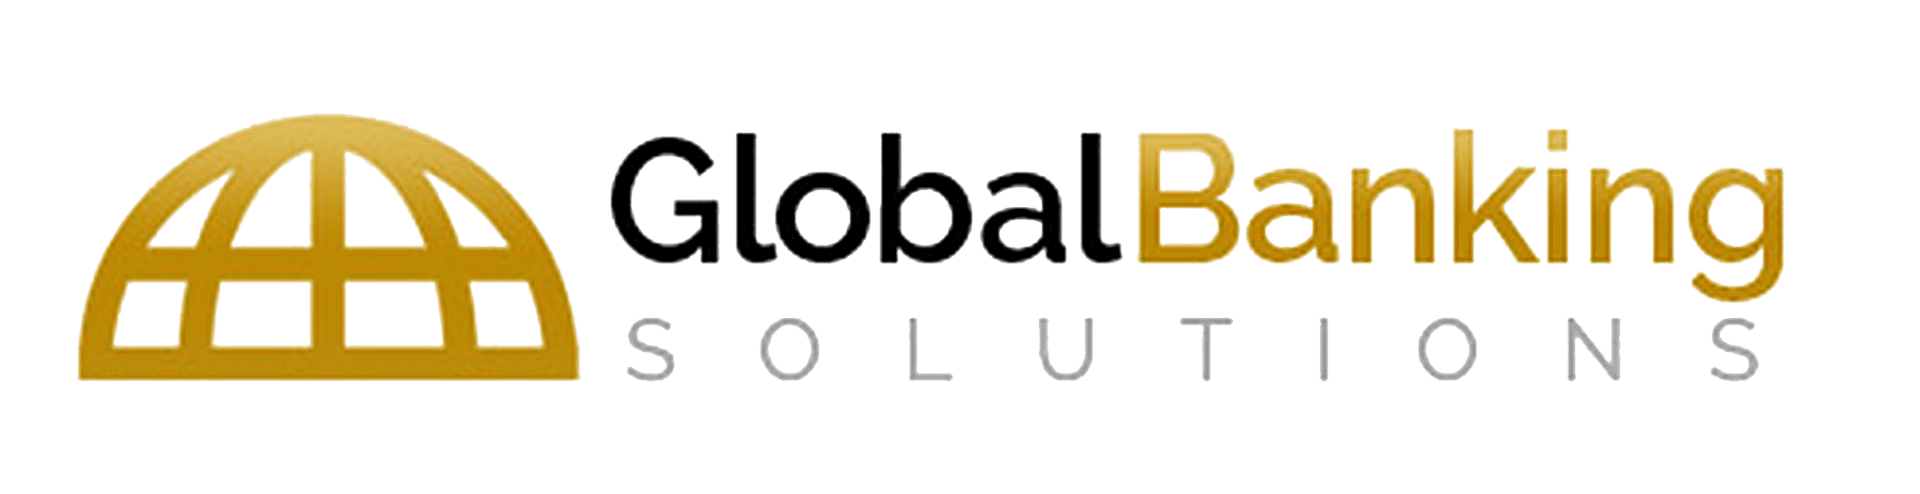 Global Banking Solutions